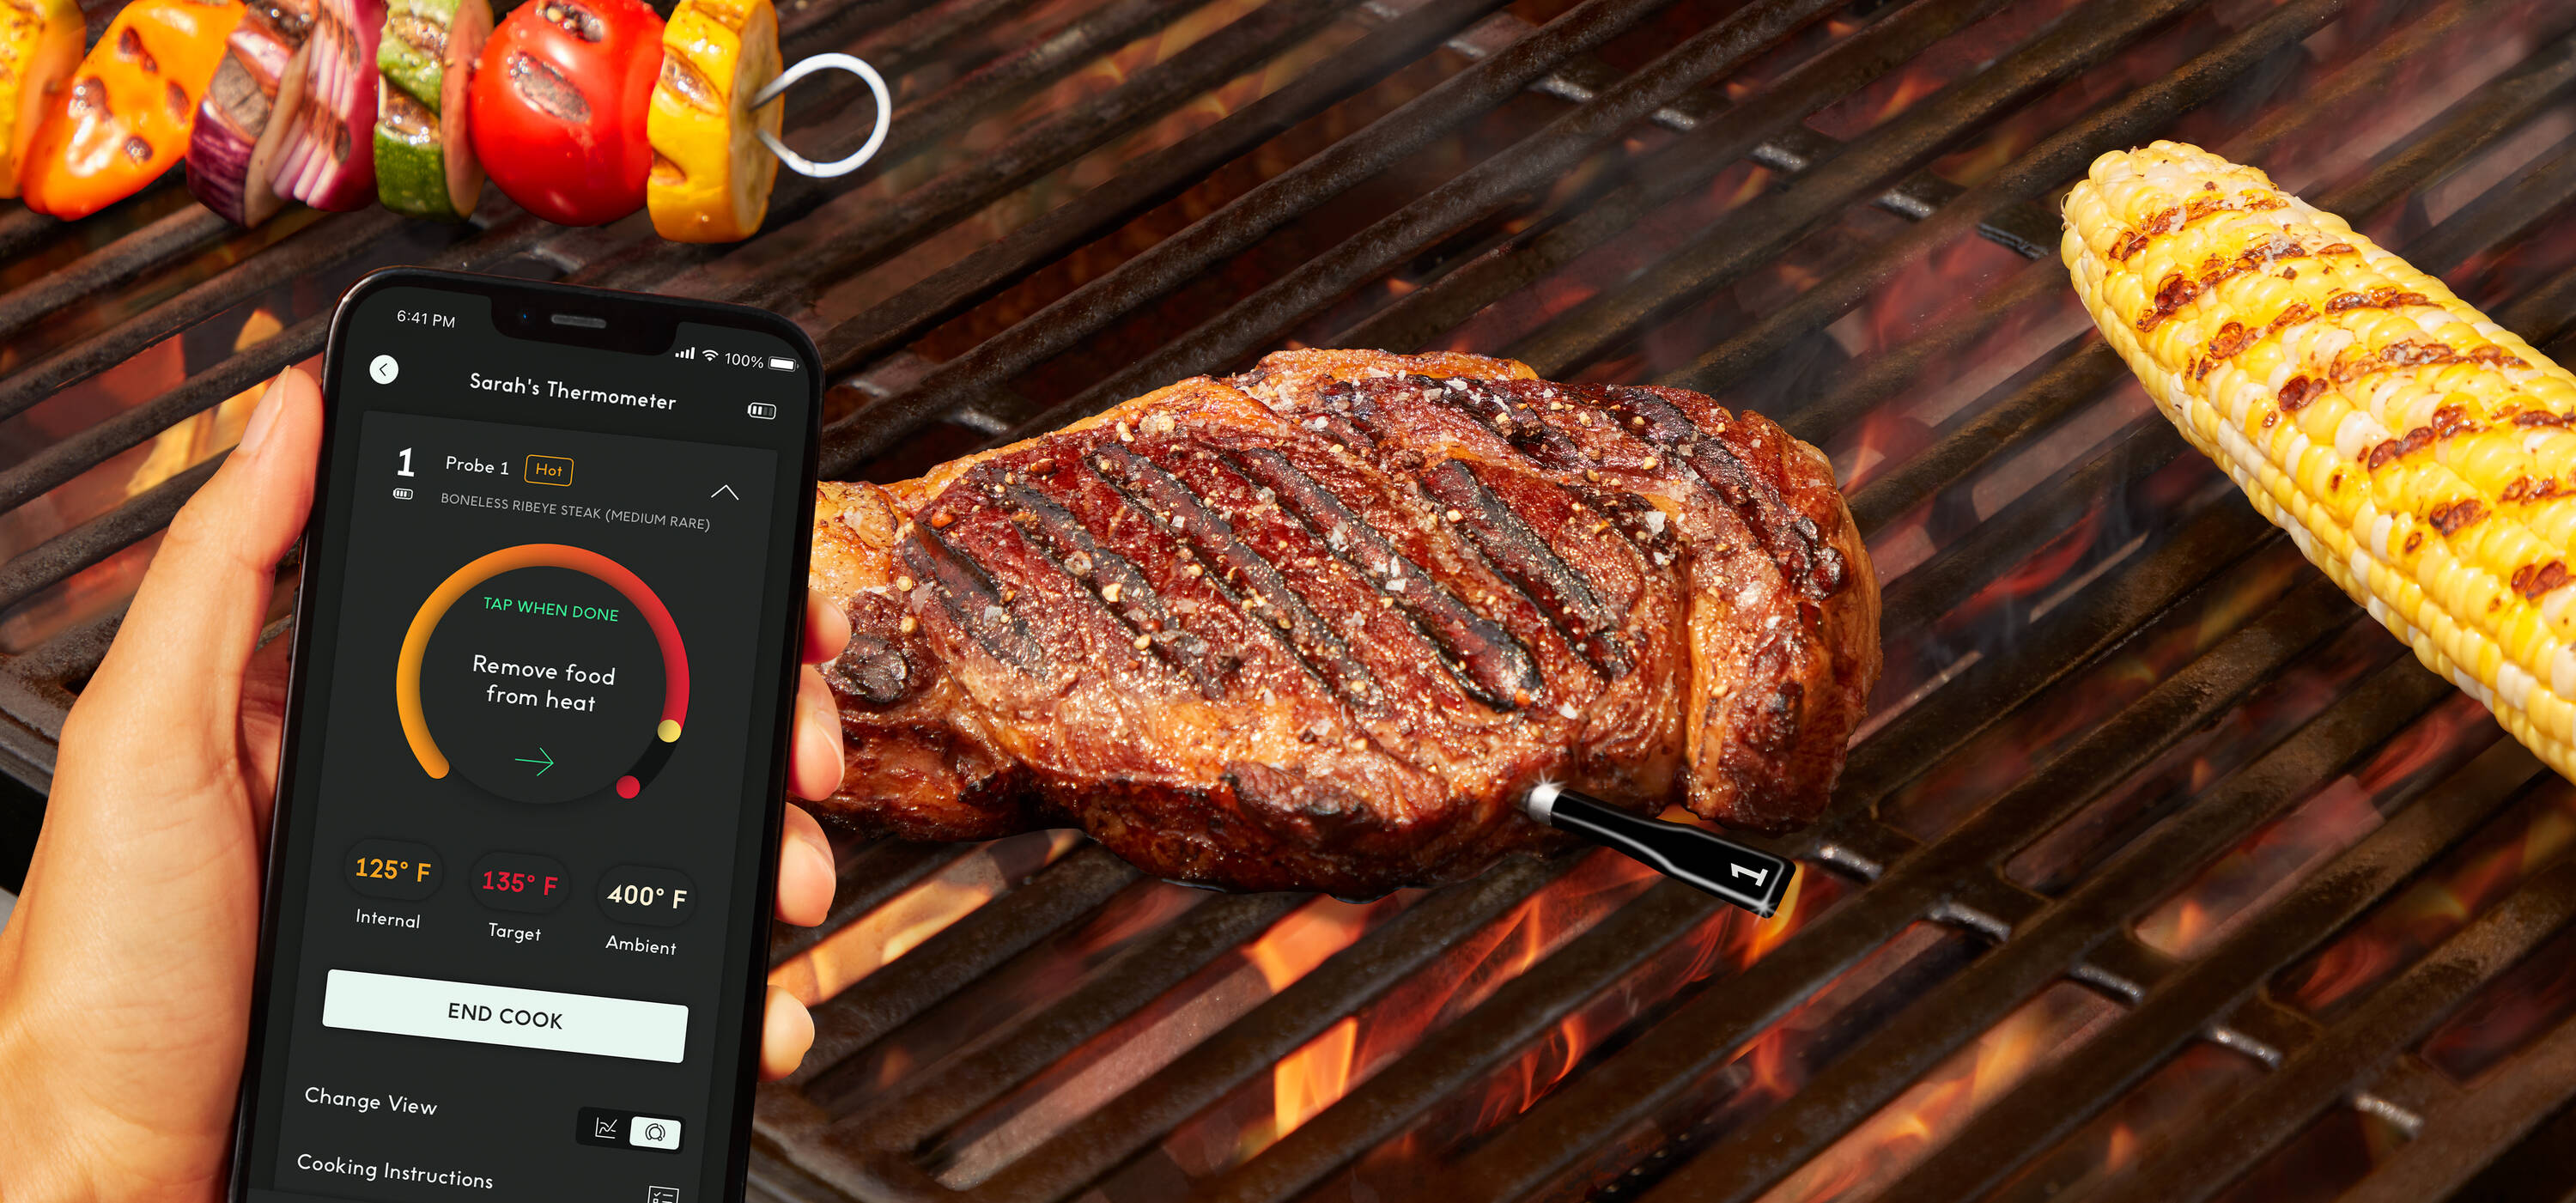 Chef iQ Smart Thermometer Add-on Probe No. 2 - Bluetooth/WiFi Enabled,  Allows Monitoring of Two Foods at Once, for Grill, Oven, Smoker, Air Fryer